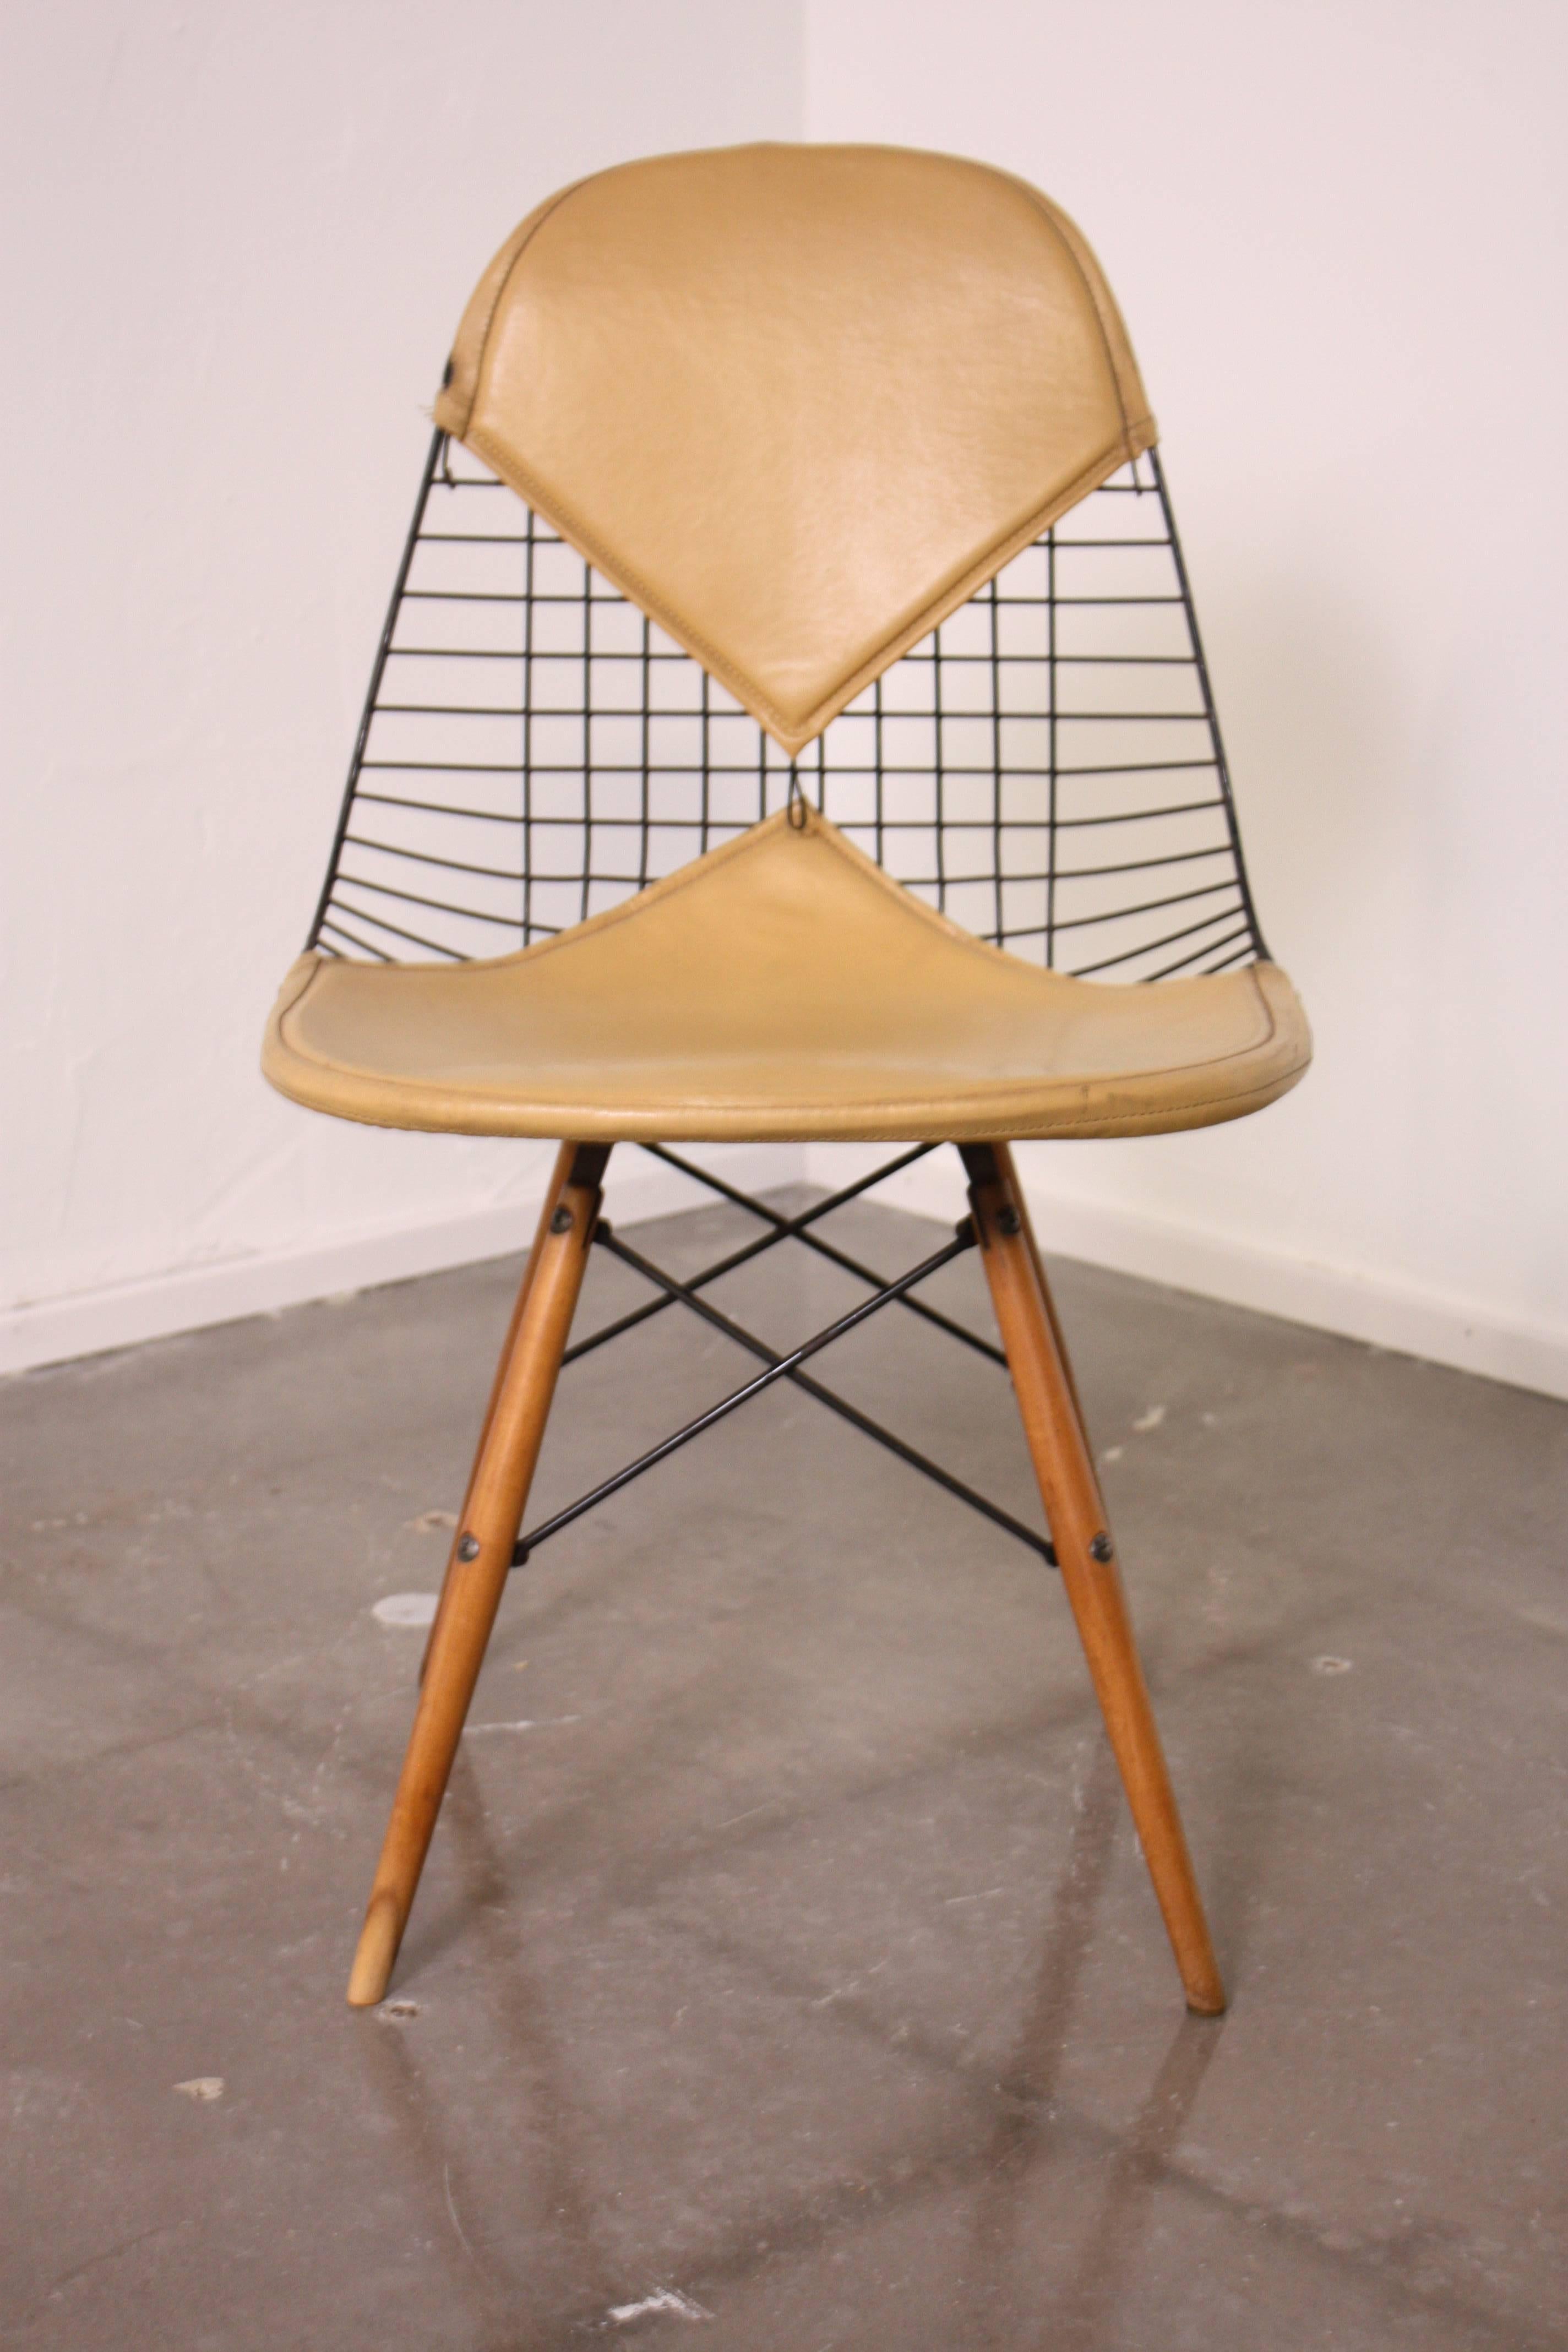 Early production Eames DKW dowel leg side chair with bikini cushion by Herman Miller.